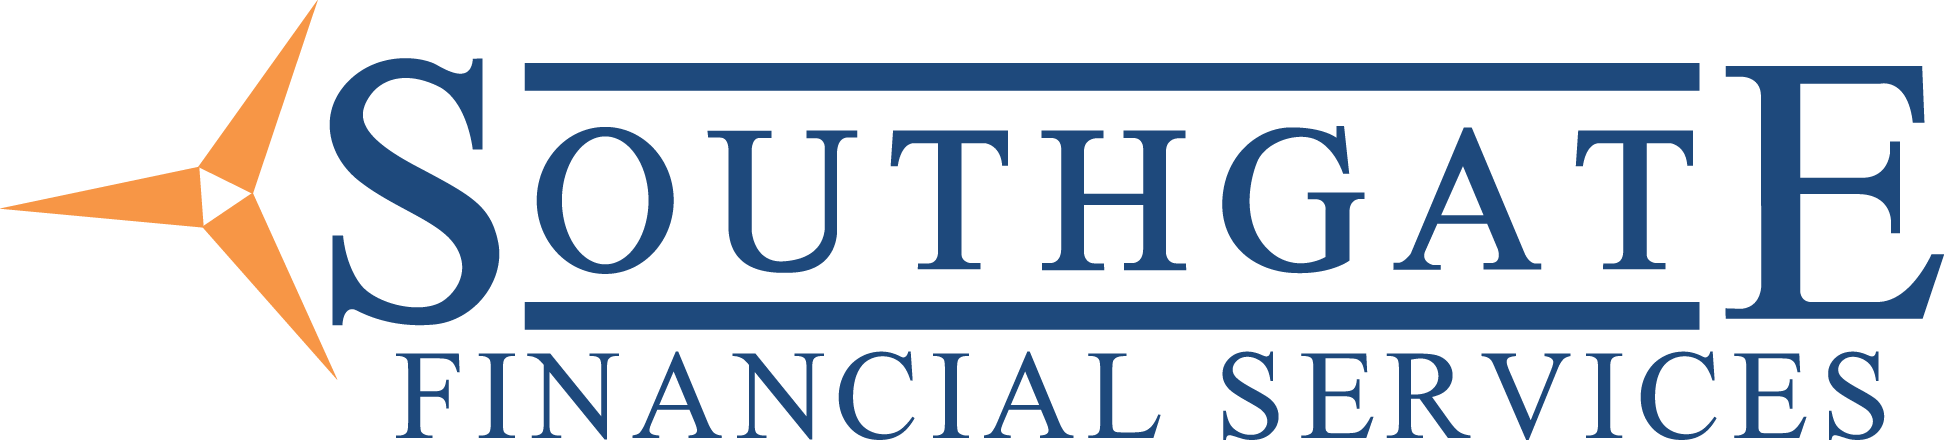 Southgate Financial Services